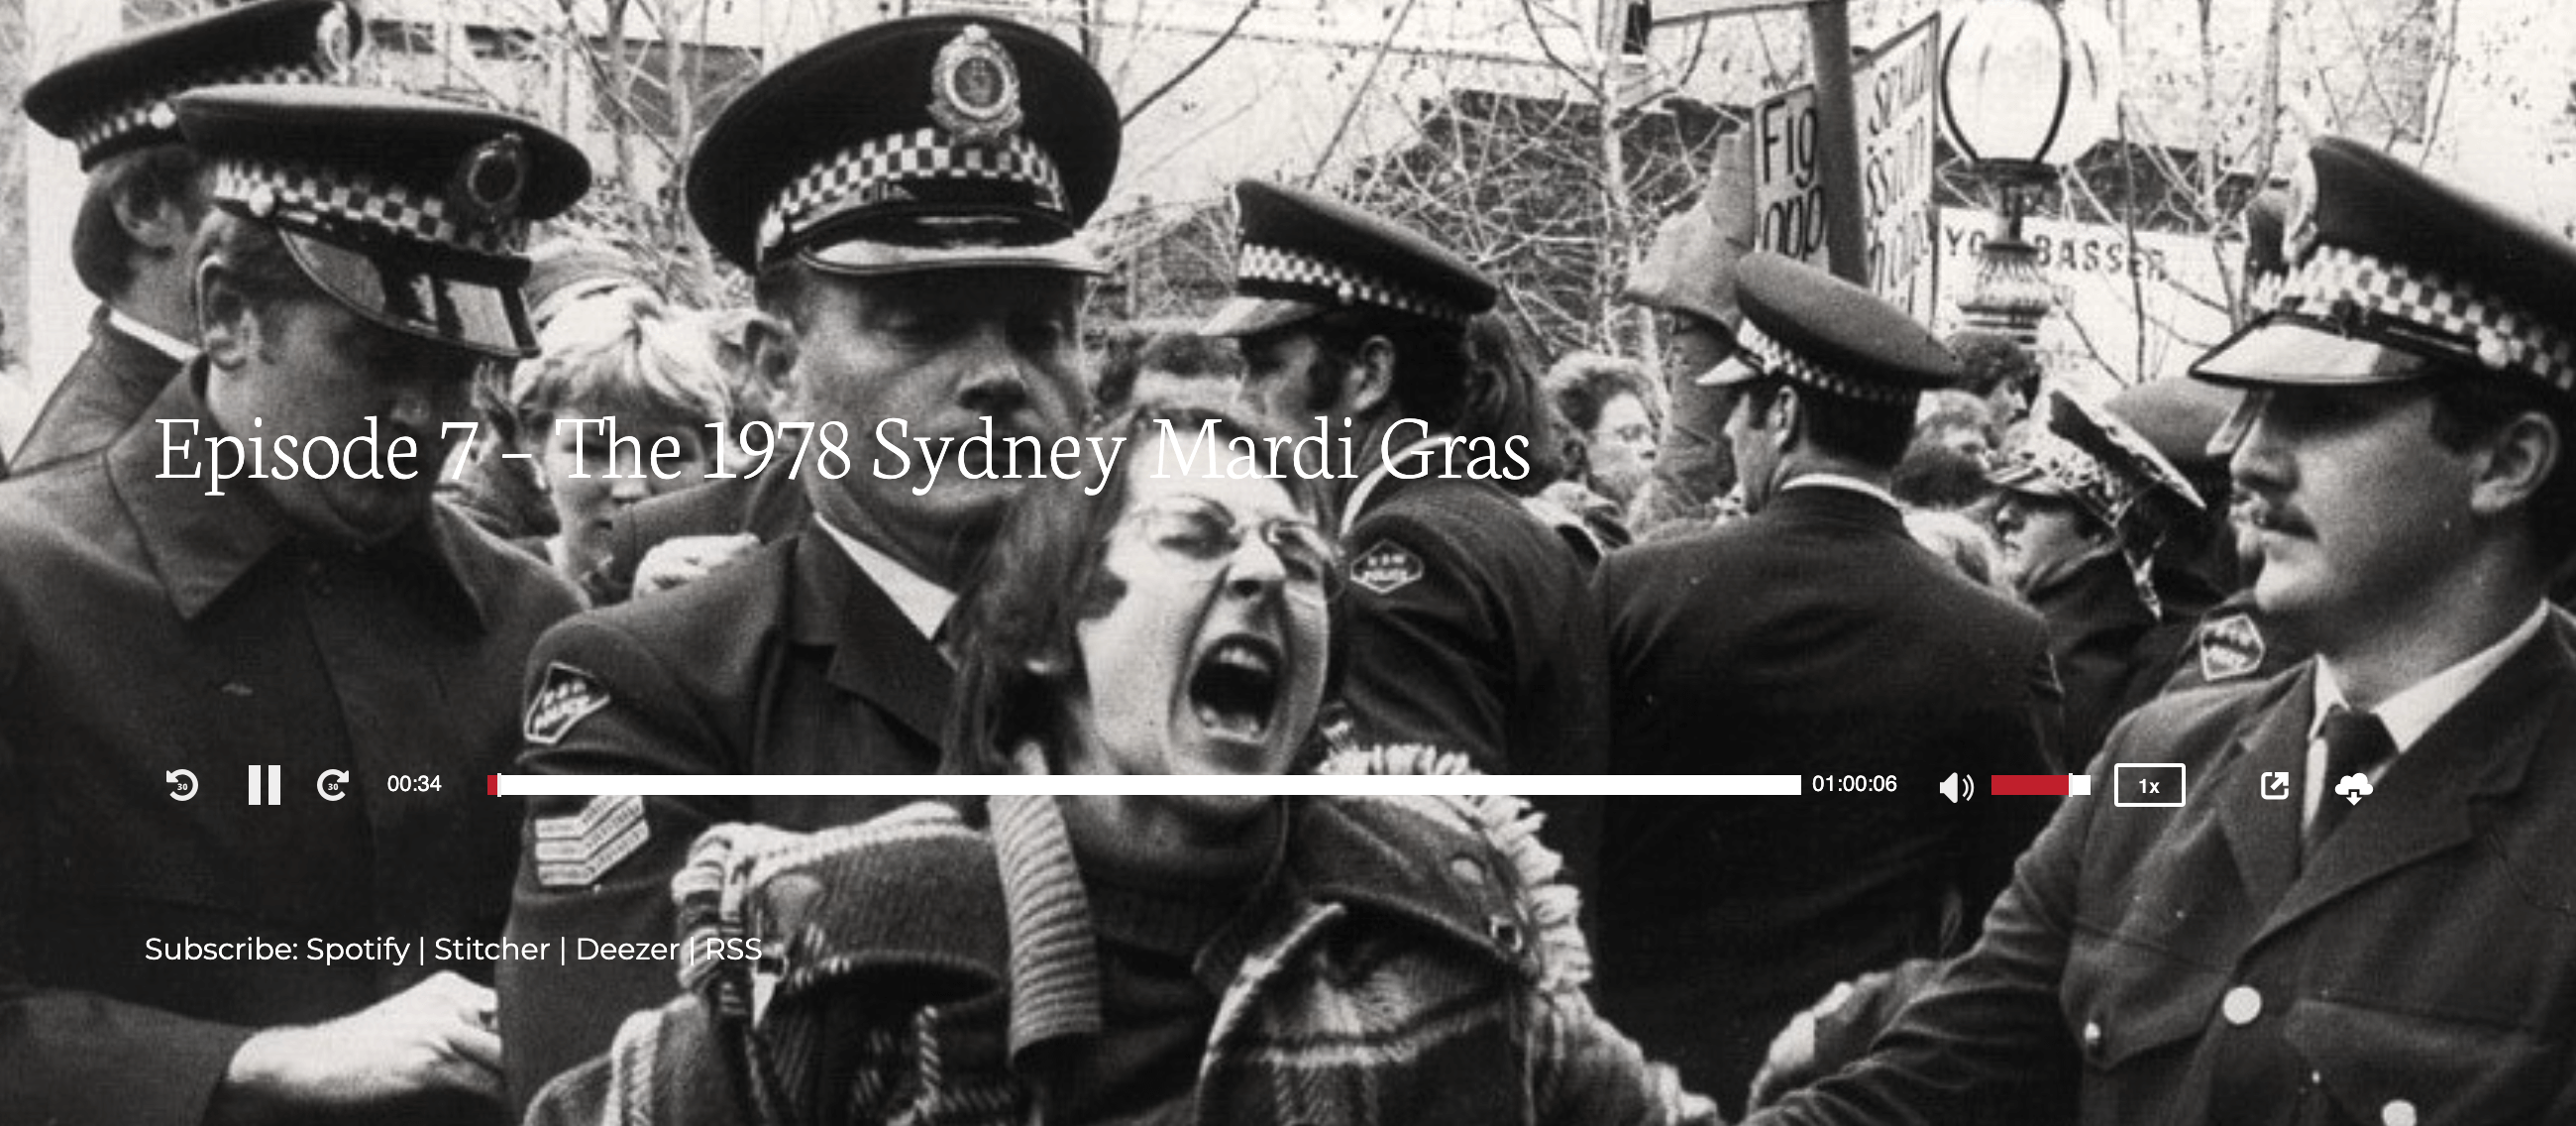 black and white photo from the first sydney mardi gra. A group of male police surrounding woman who is struggling and screaming out.